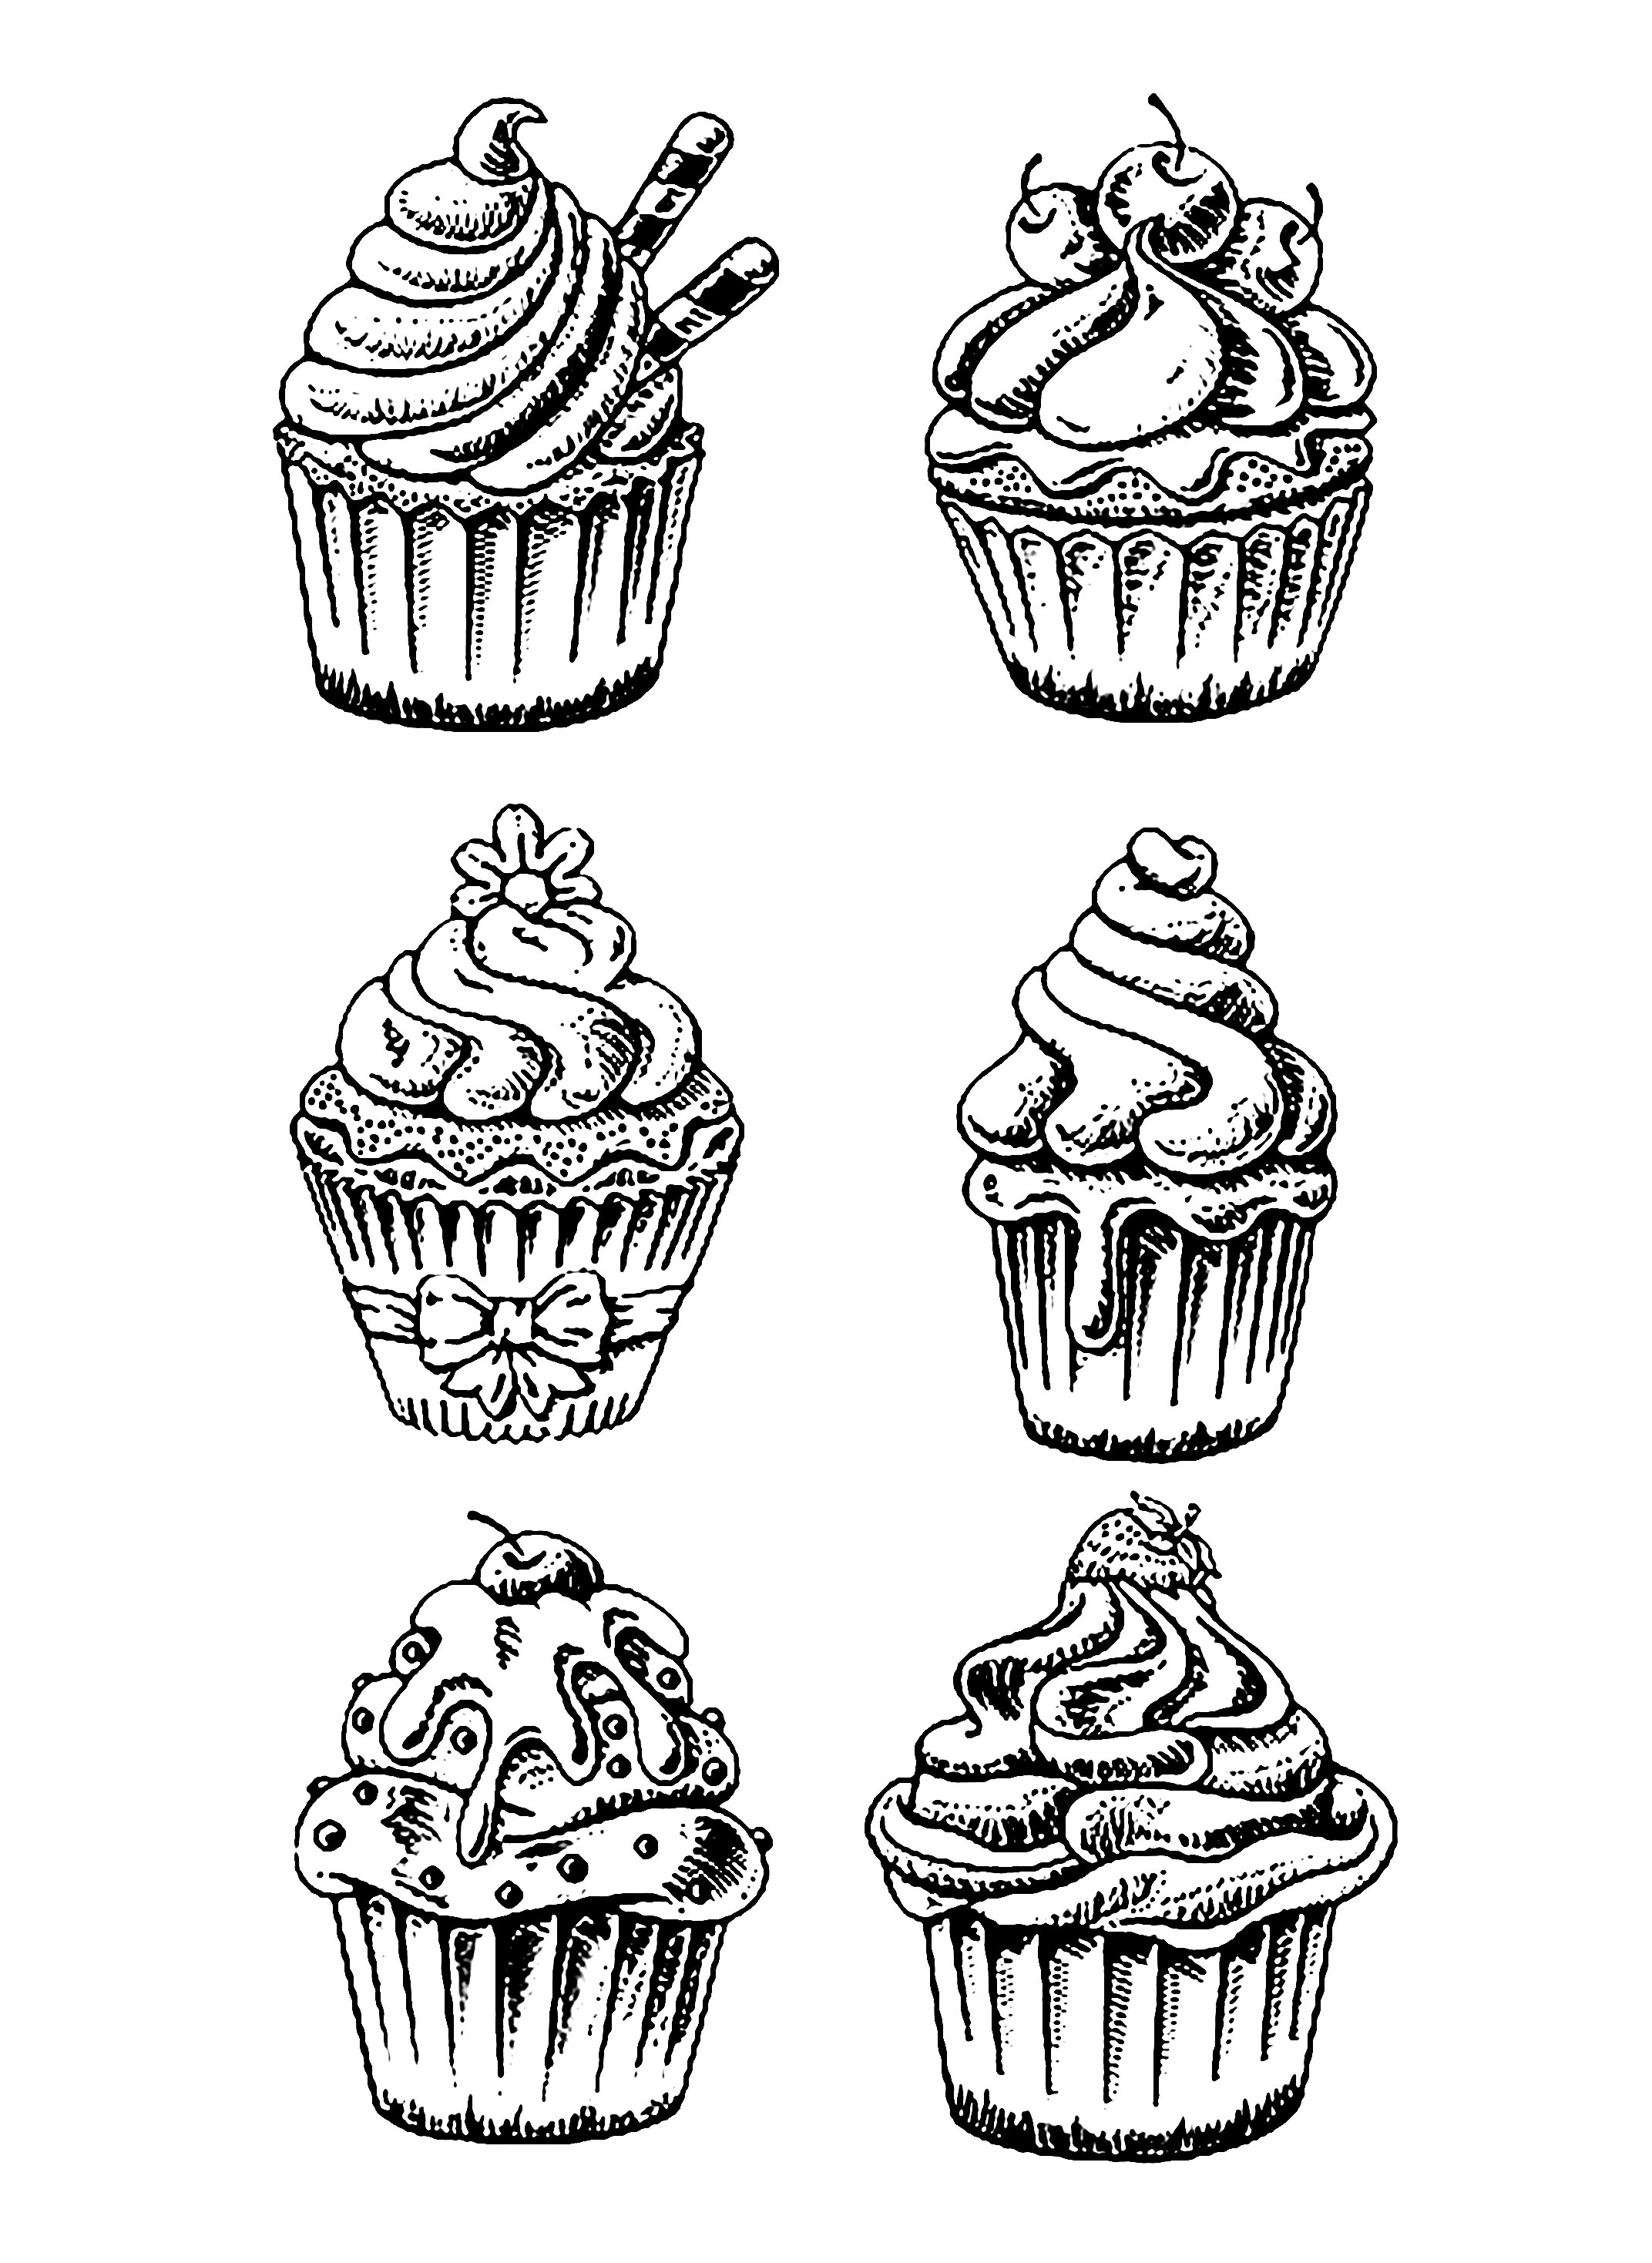 Six good Cupcakes to color without waiting